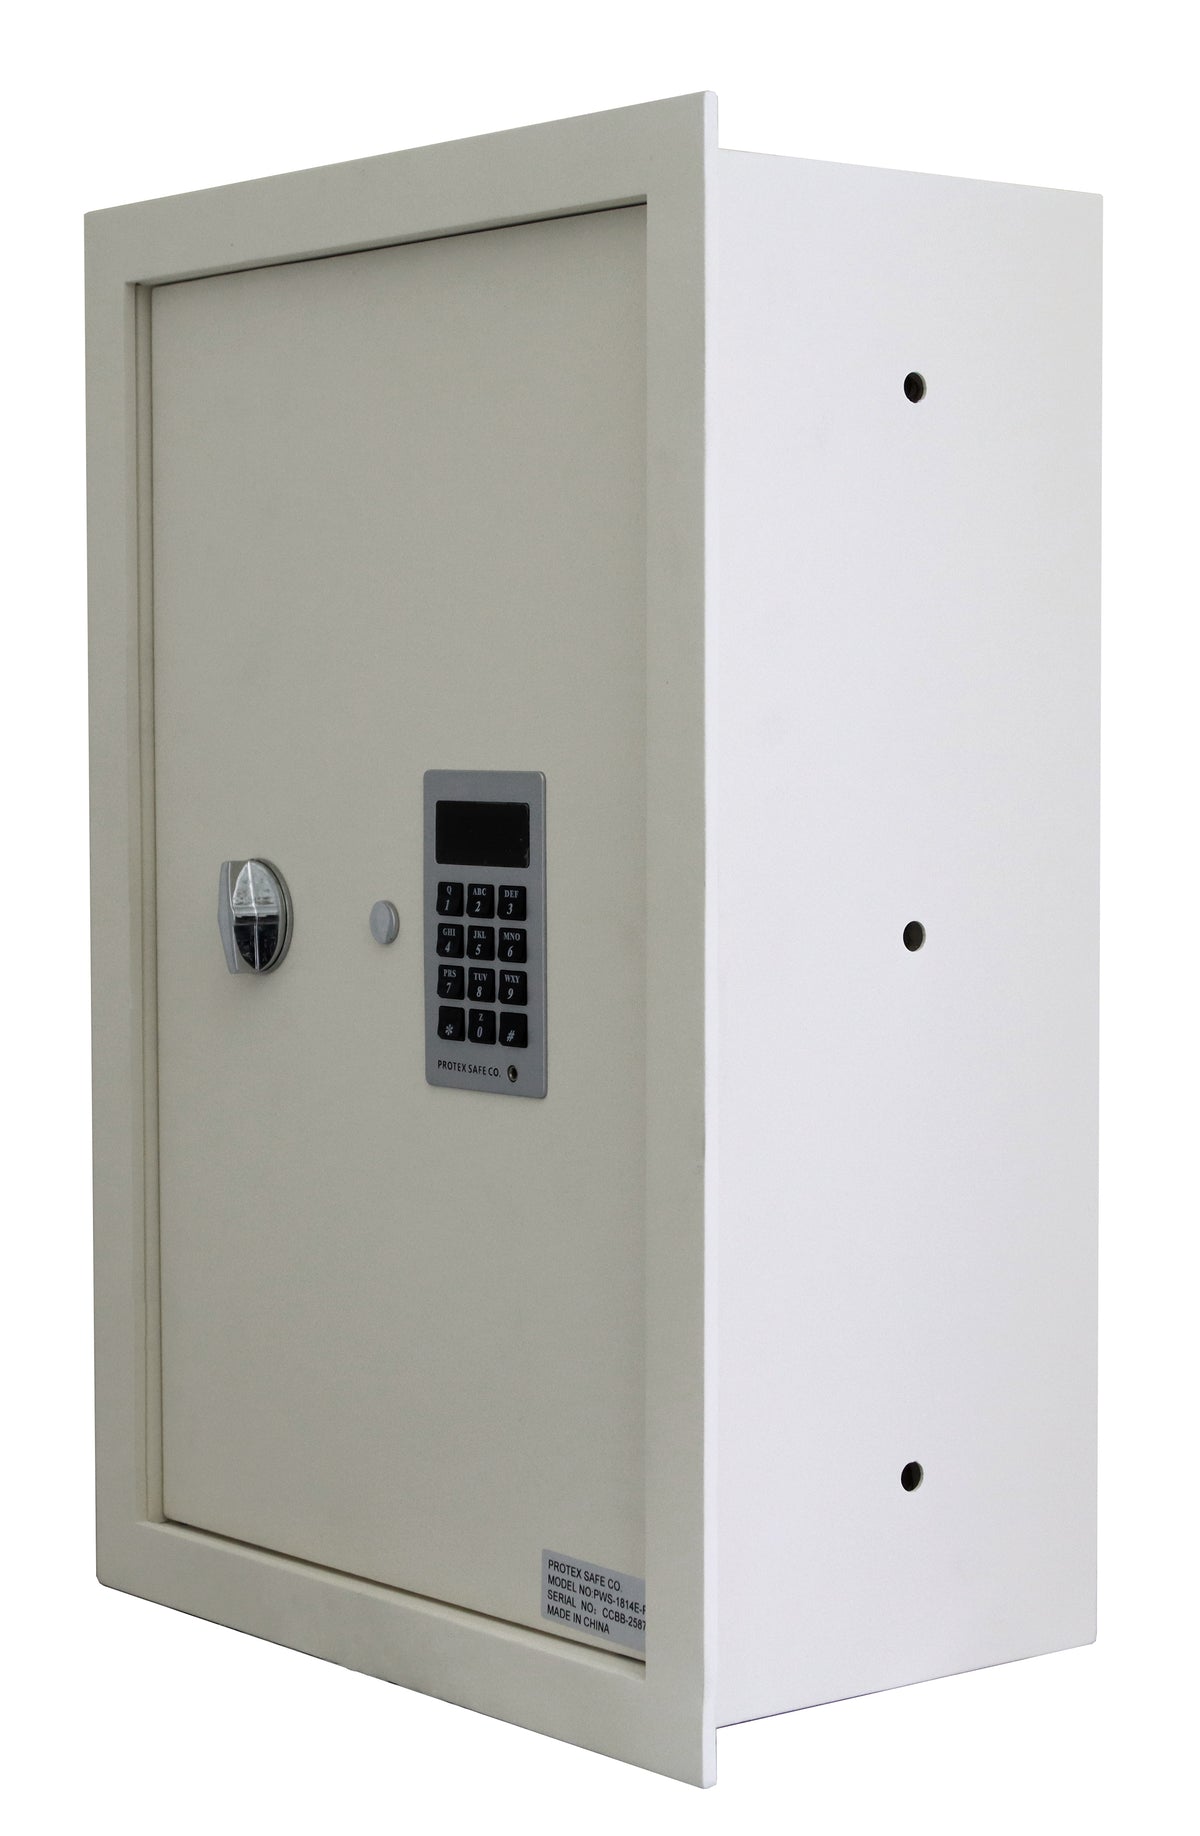 Protex PWS-1814E-FR 30 Minute Fire Rated Wall Safe Side View 2